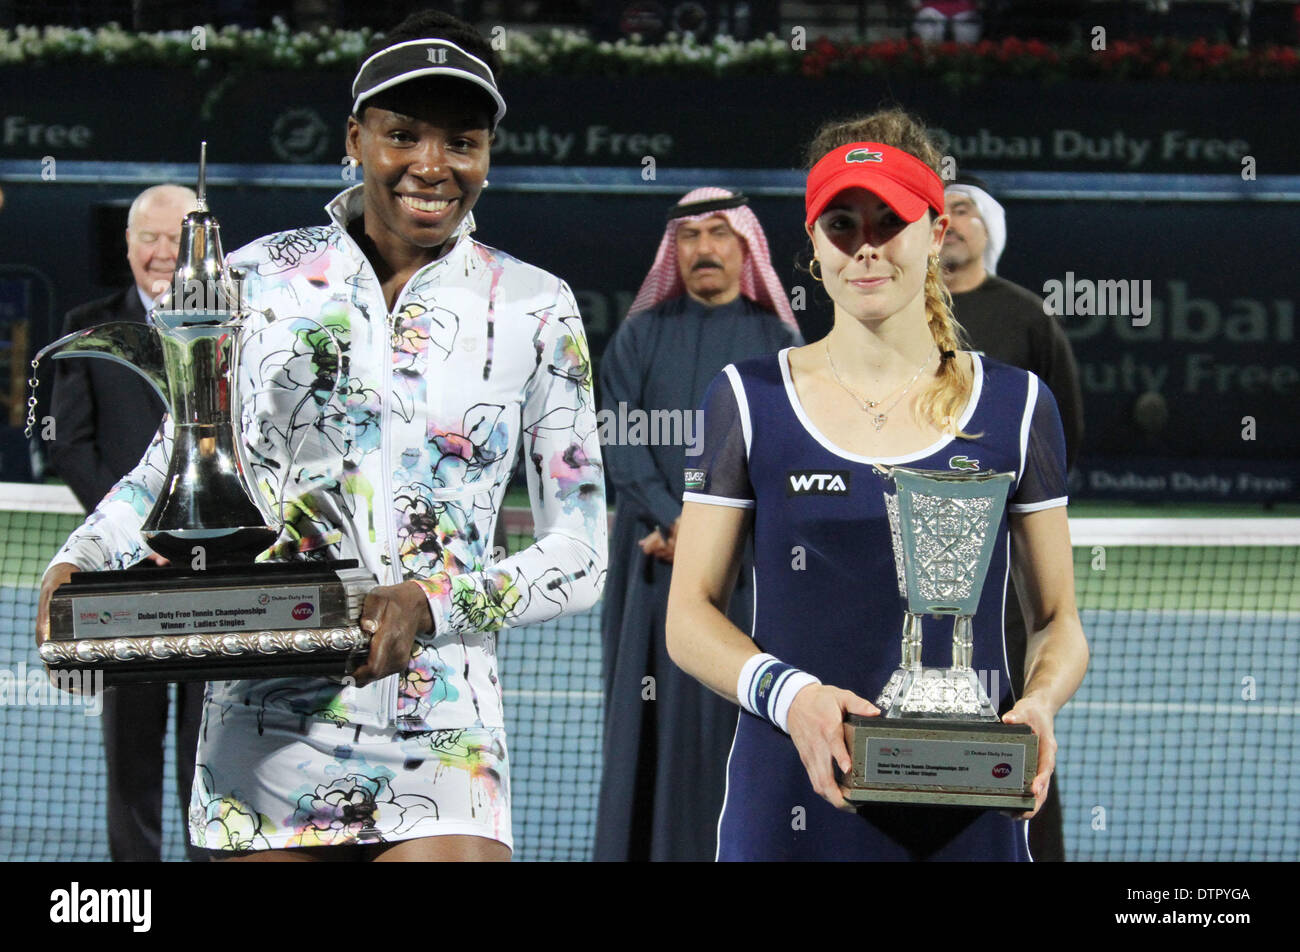 Dubai, United Arab Emirates. 22nd Feb, 2014. Venus Williams (L) of the United States and Alize Cornet of France pose for photograph during the awarding ceremony of their final match at the Dubai Tennis Championships in Dubai, United Arab Emirates, Feb. 22, 2014. Venus Williams won 2-0 to claim the champion. Credit:  Li Zhen/Xinhua/Alamy Live News Stock Photo